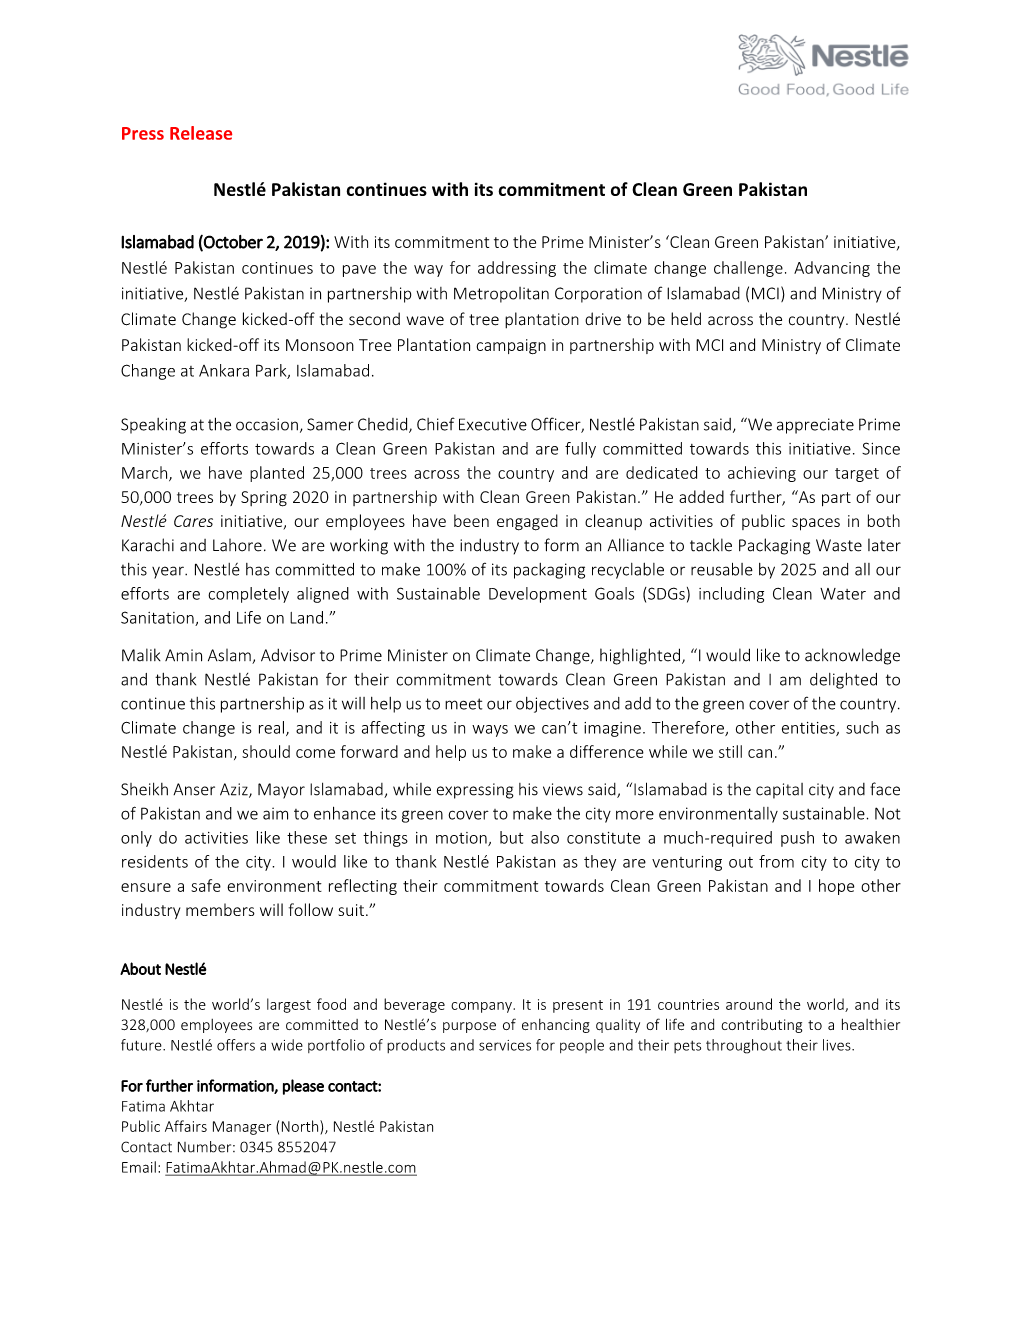 Press Release Nestlé Pakistan Continues with Its Commitment Of